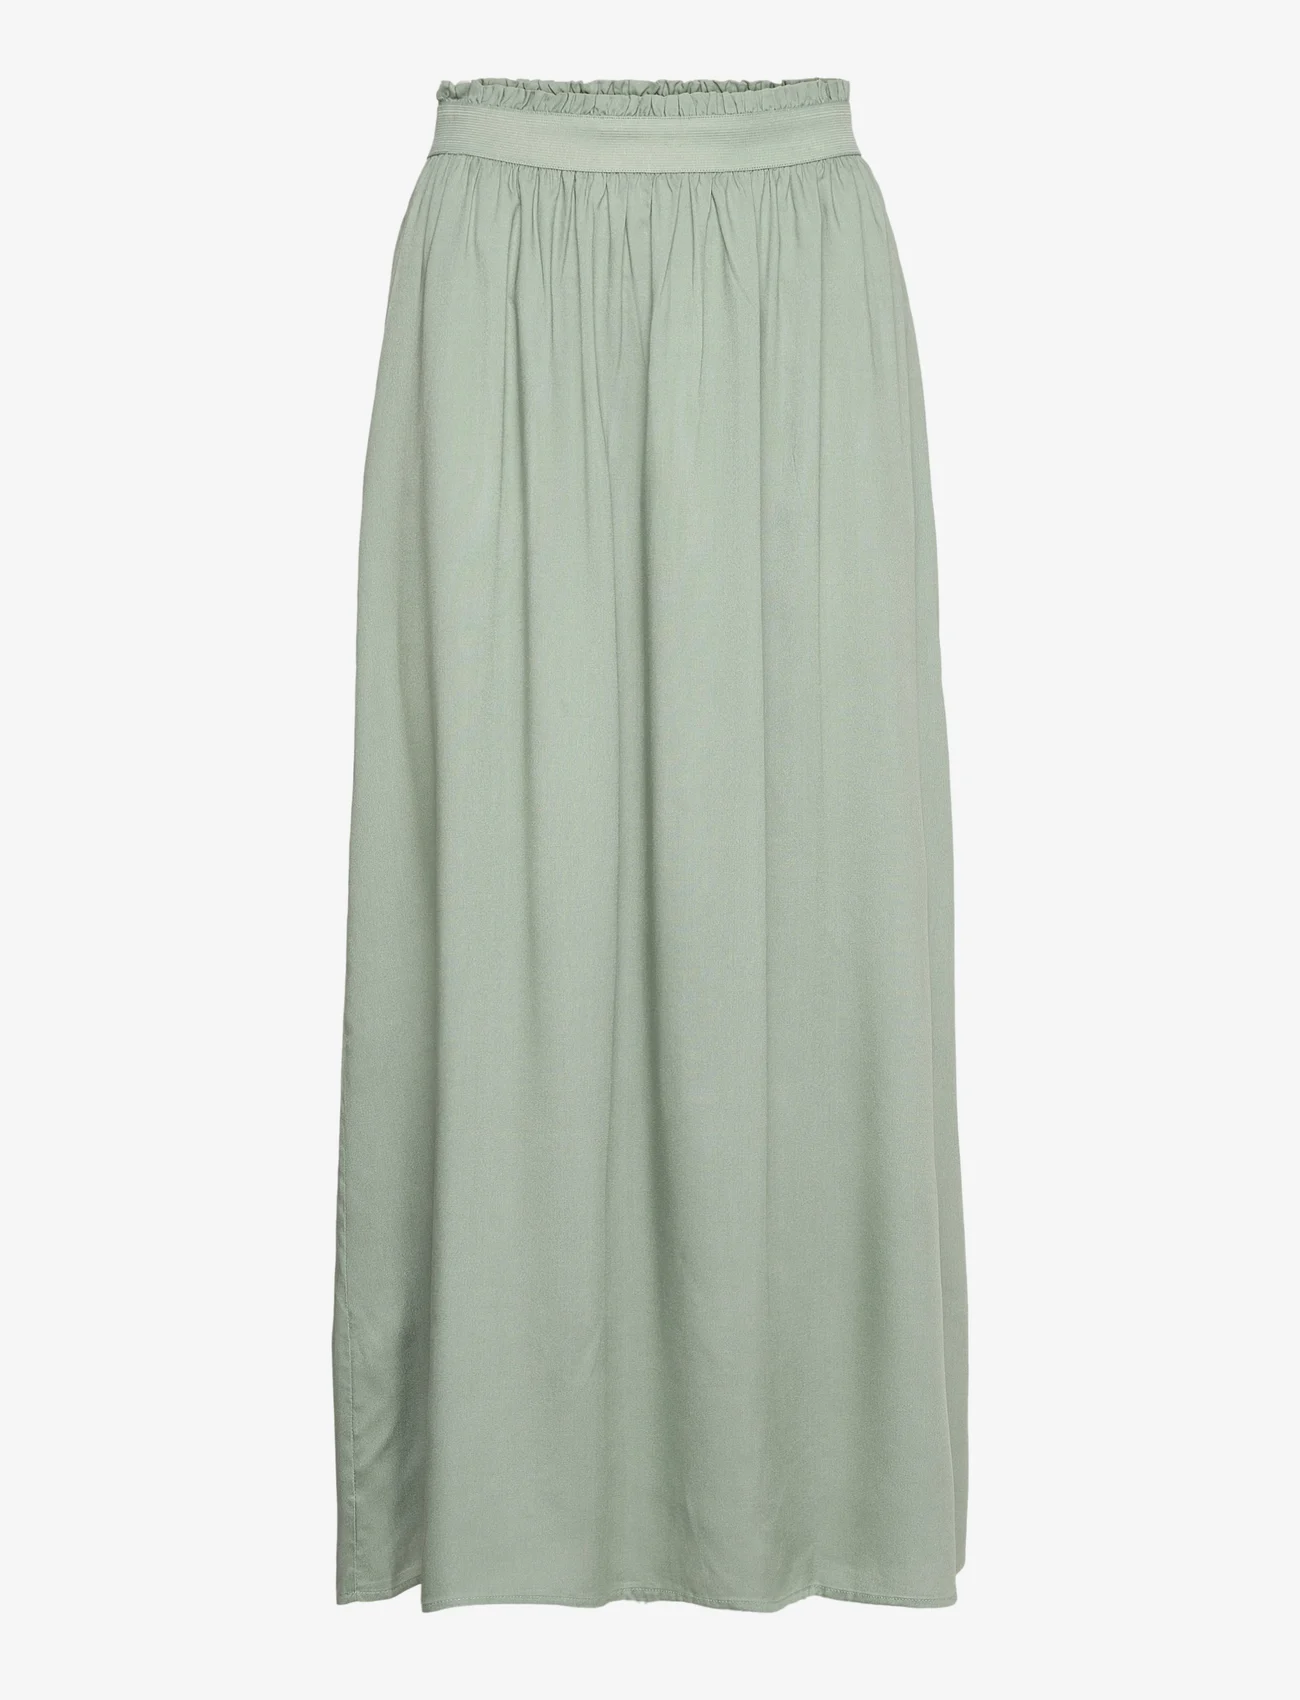 ONLY - ONLVENEDIG LIFE LONG SKIRT WVN NOOS - najniższe ceny - chinois green - 0